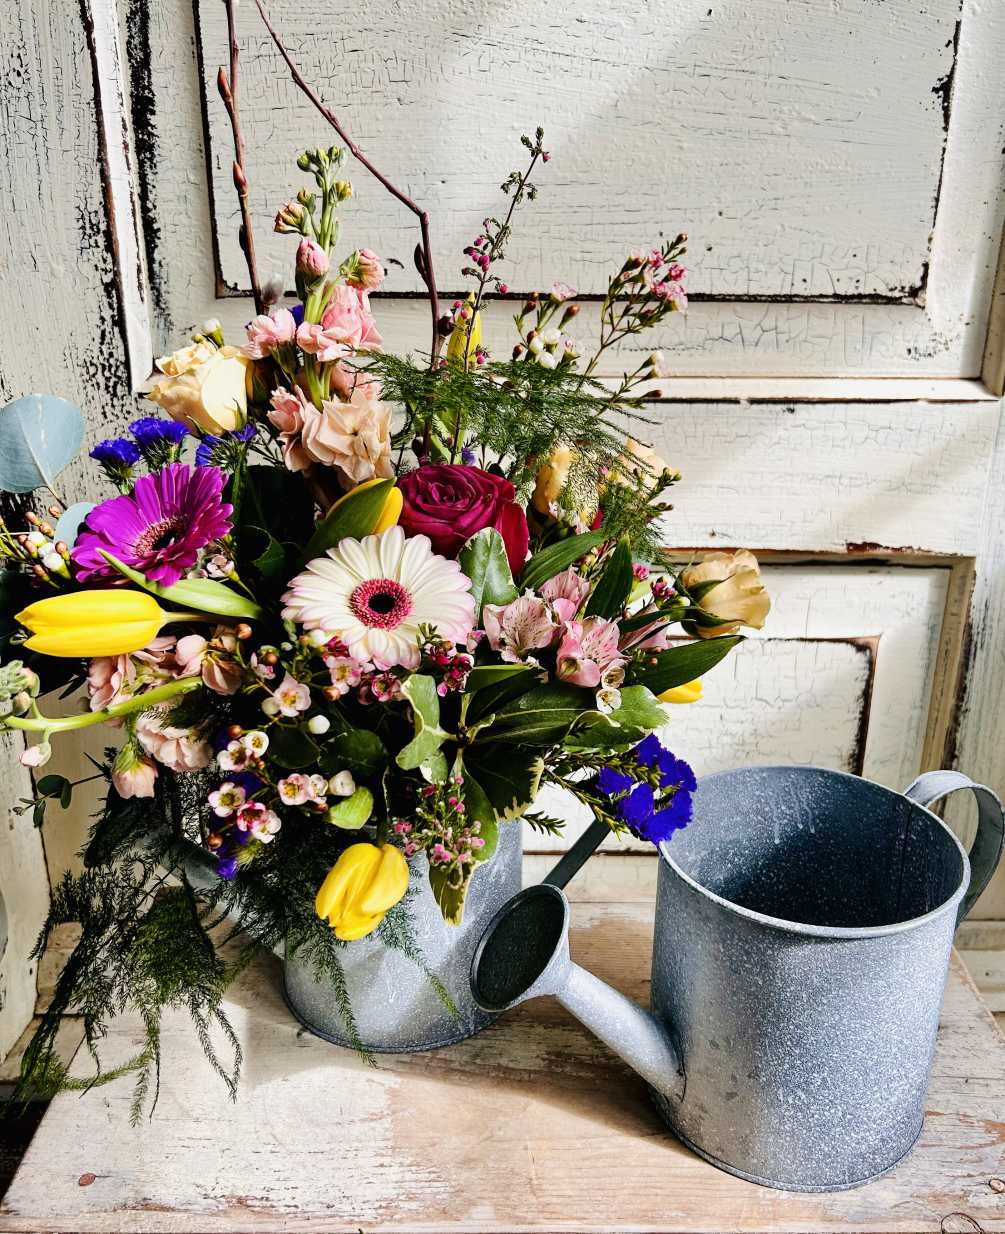 A metal watering can brimming with colorful spring blooms is a great